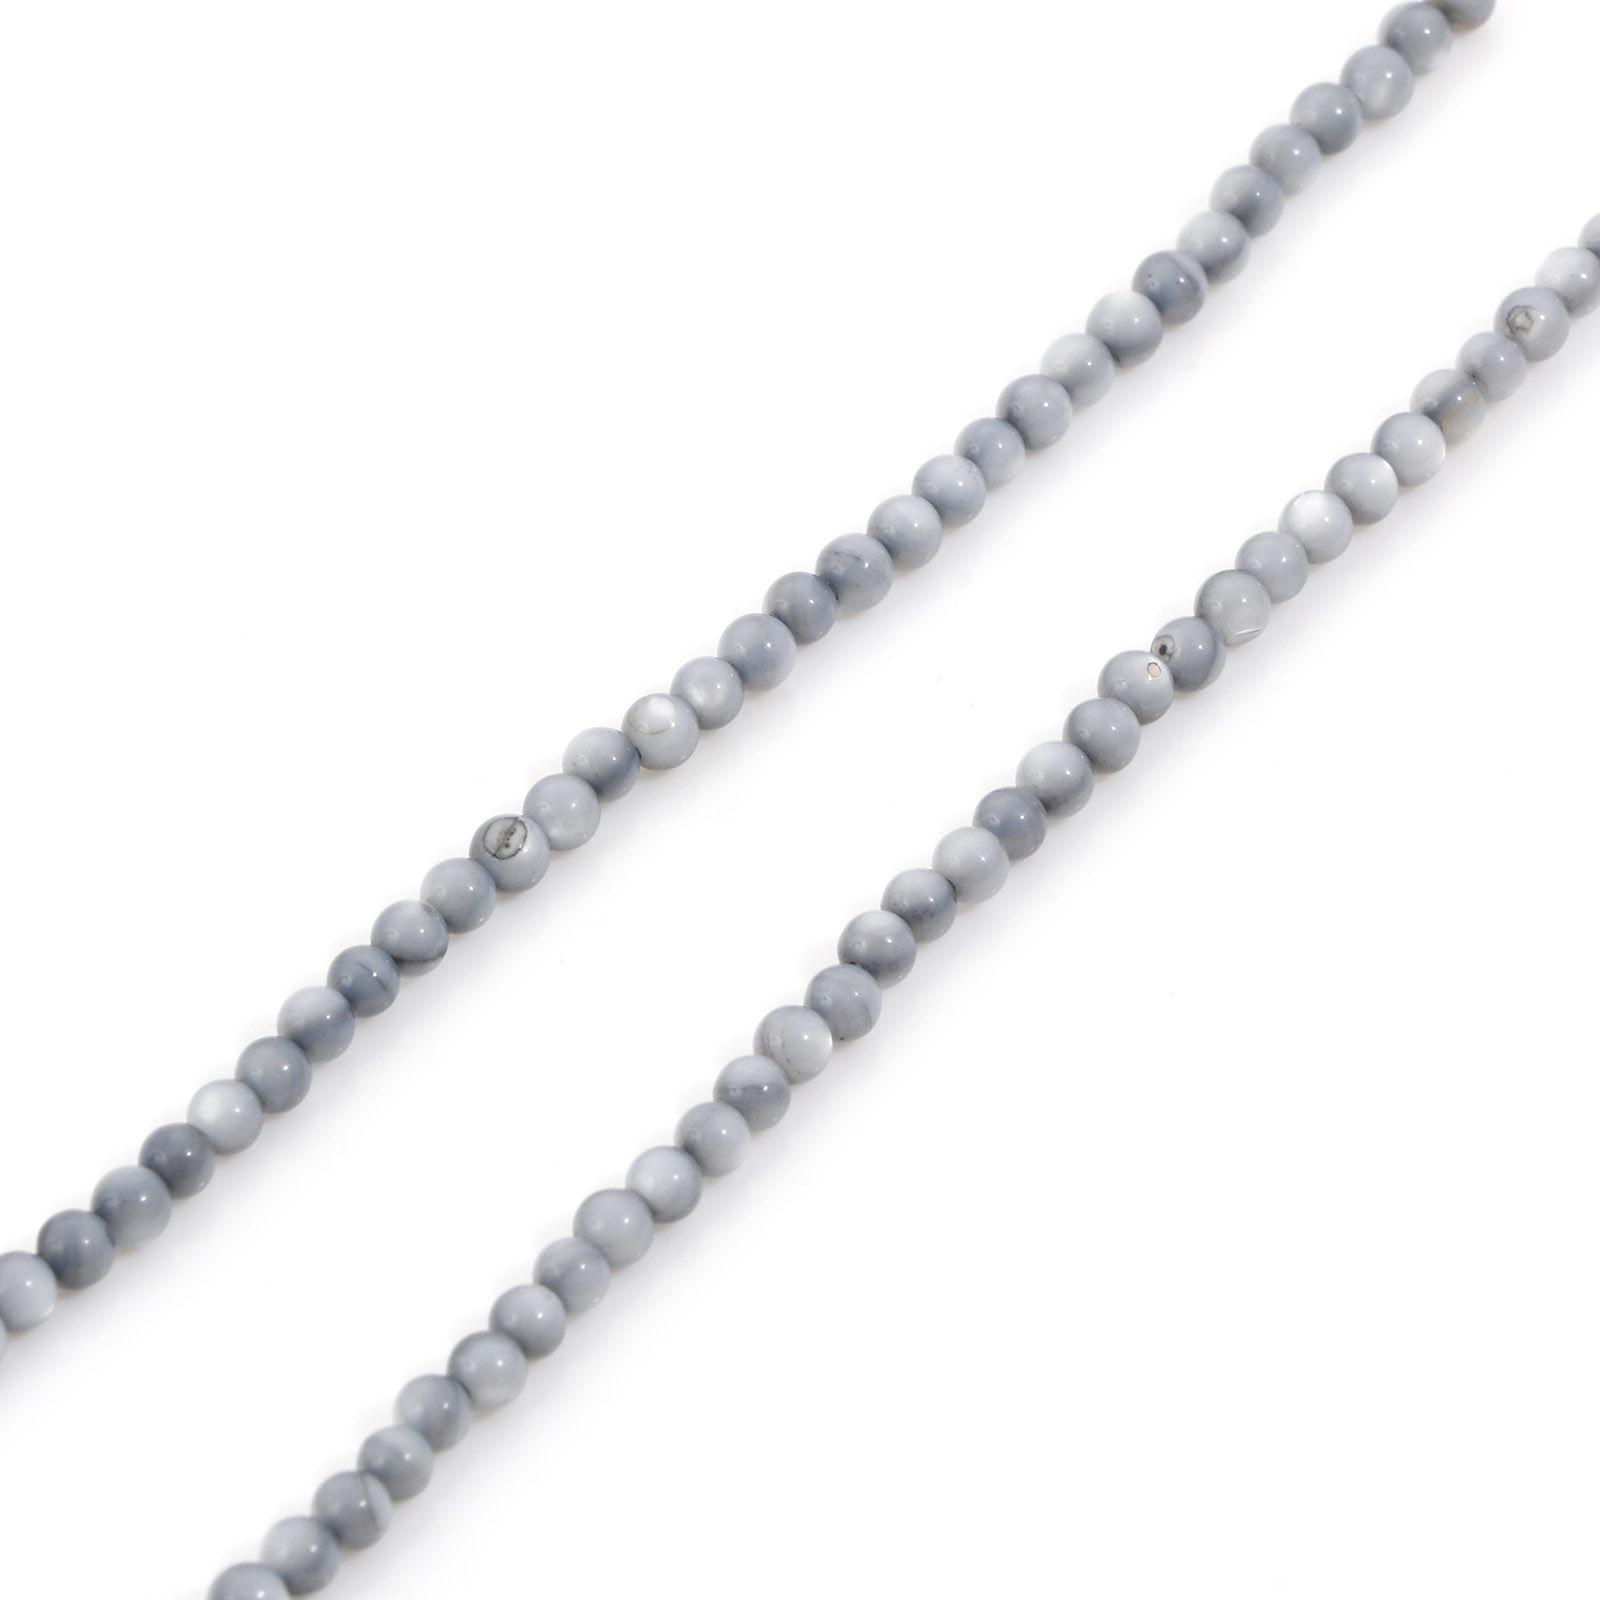 Picture of Natural Dyed Shell Loose Beads For DIY Charm Jewelry Making Round Gray About 3mm Dia, Hole:Approx 0.4mm, 38cm(15") long, 1 Strand (Approx 132 PCs/Strand)